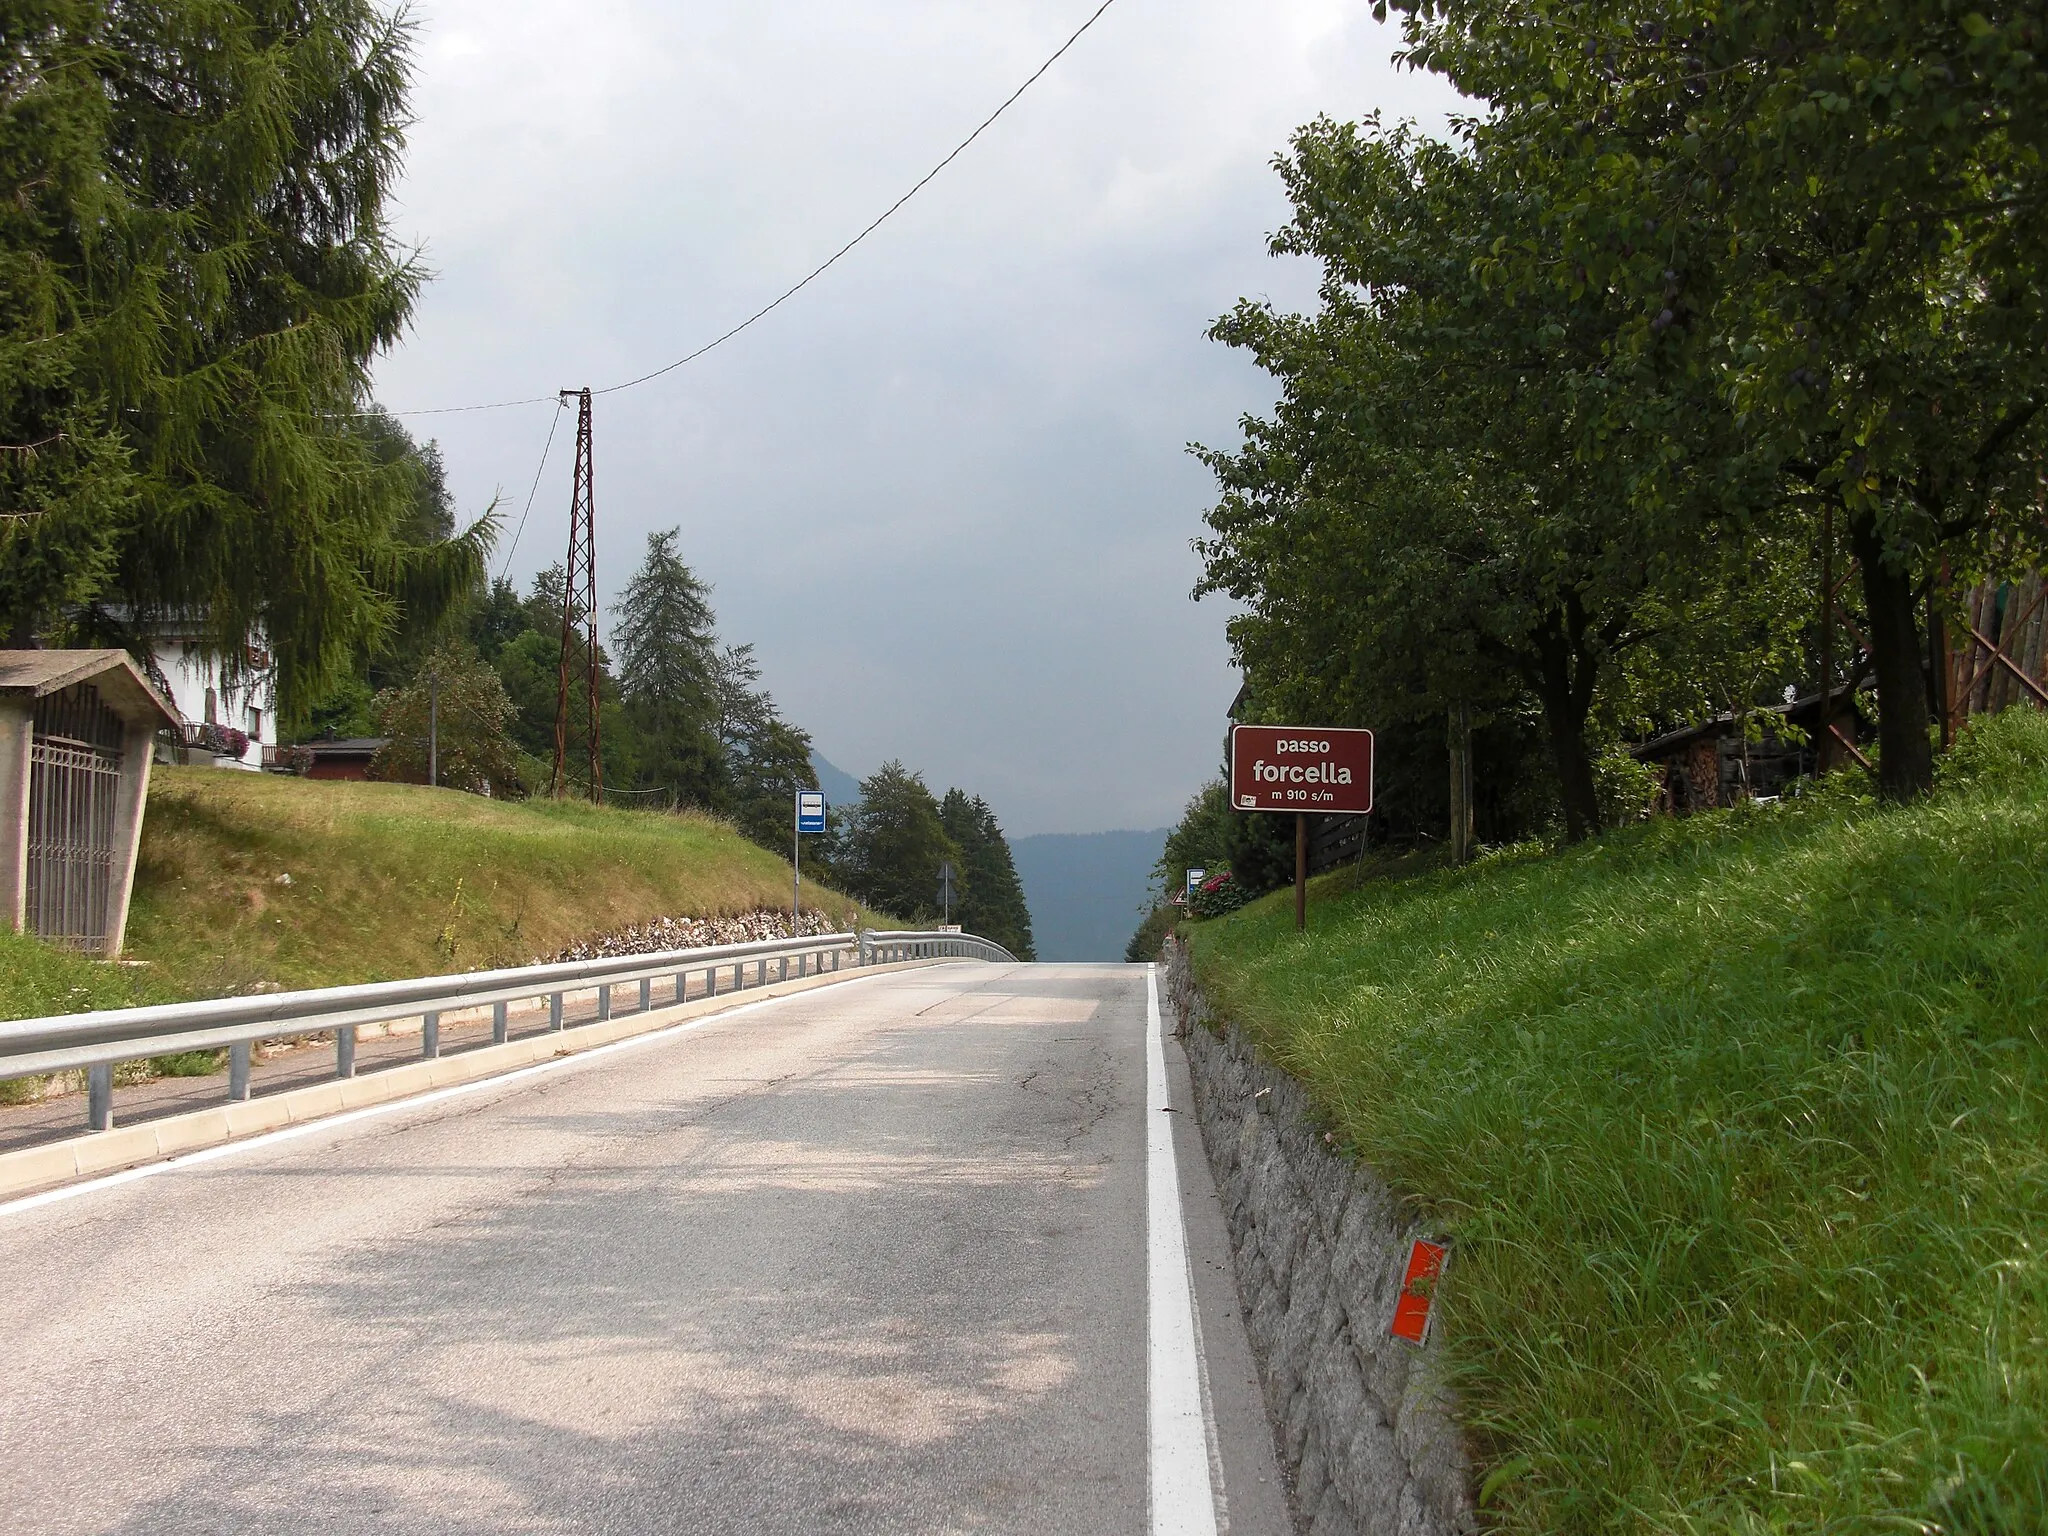 Photo showing: Passo Forcella: Pass summit with sign